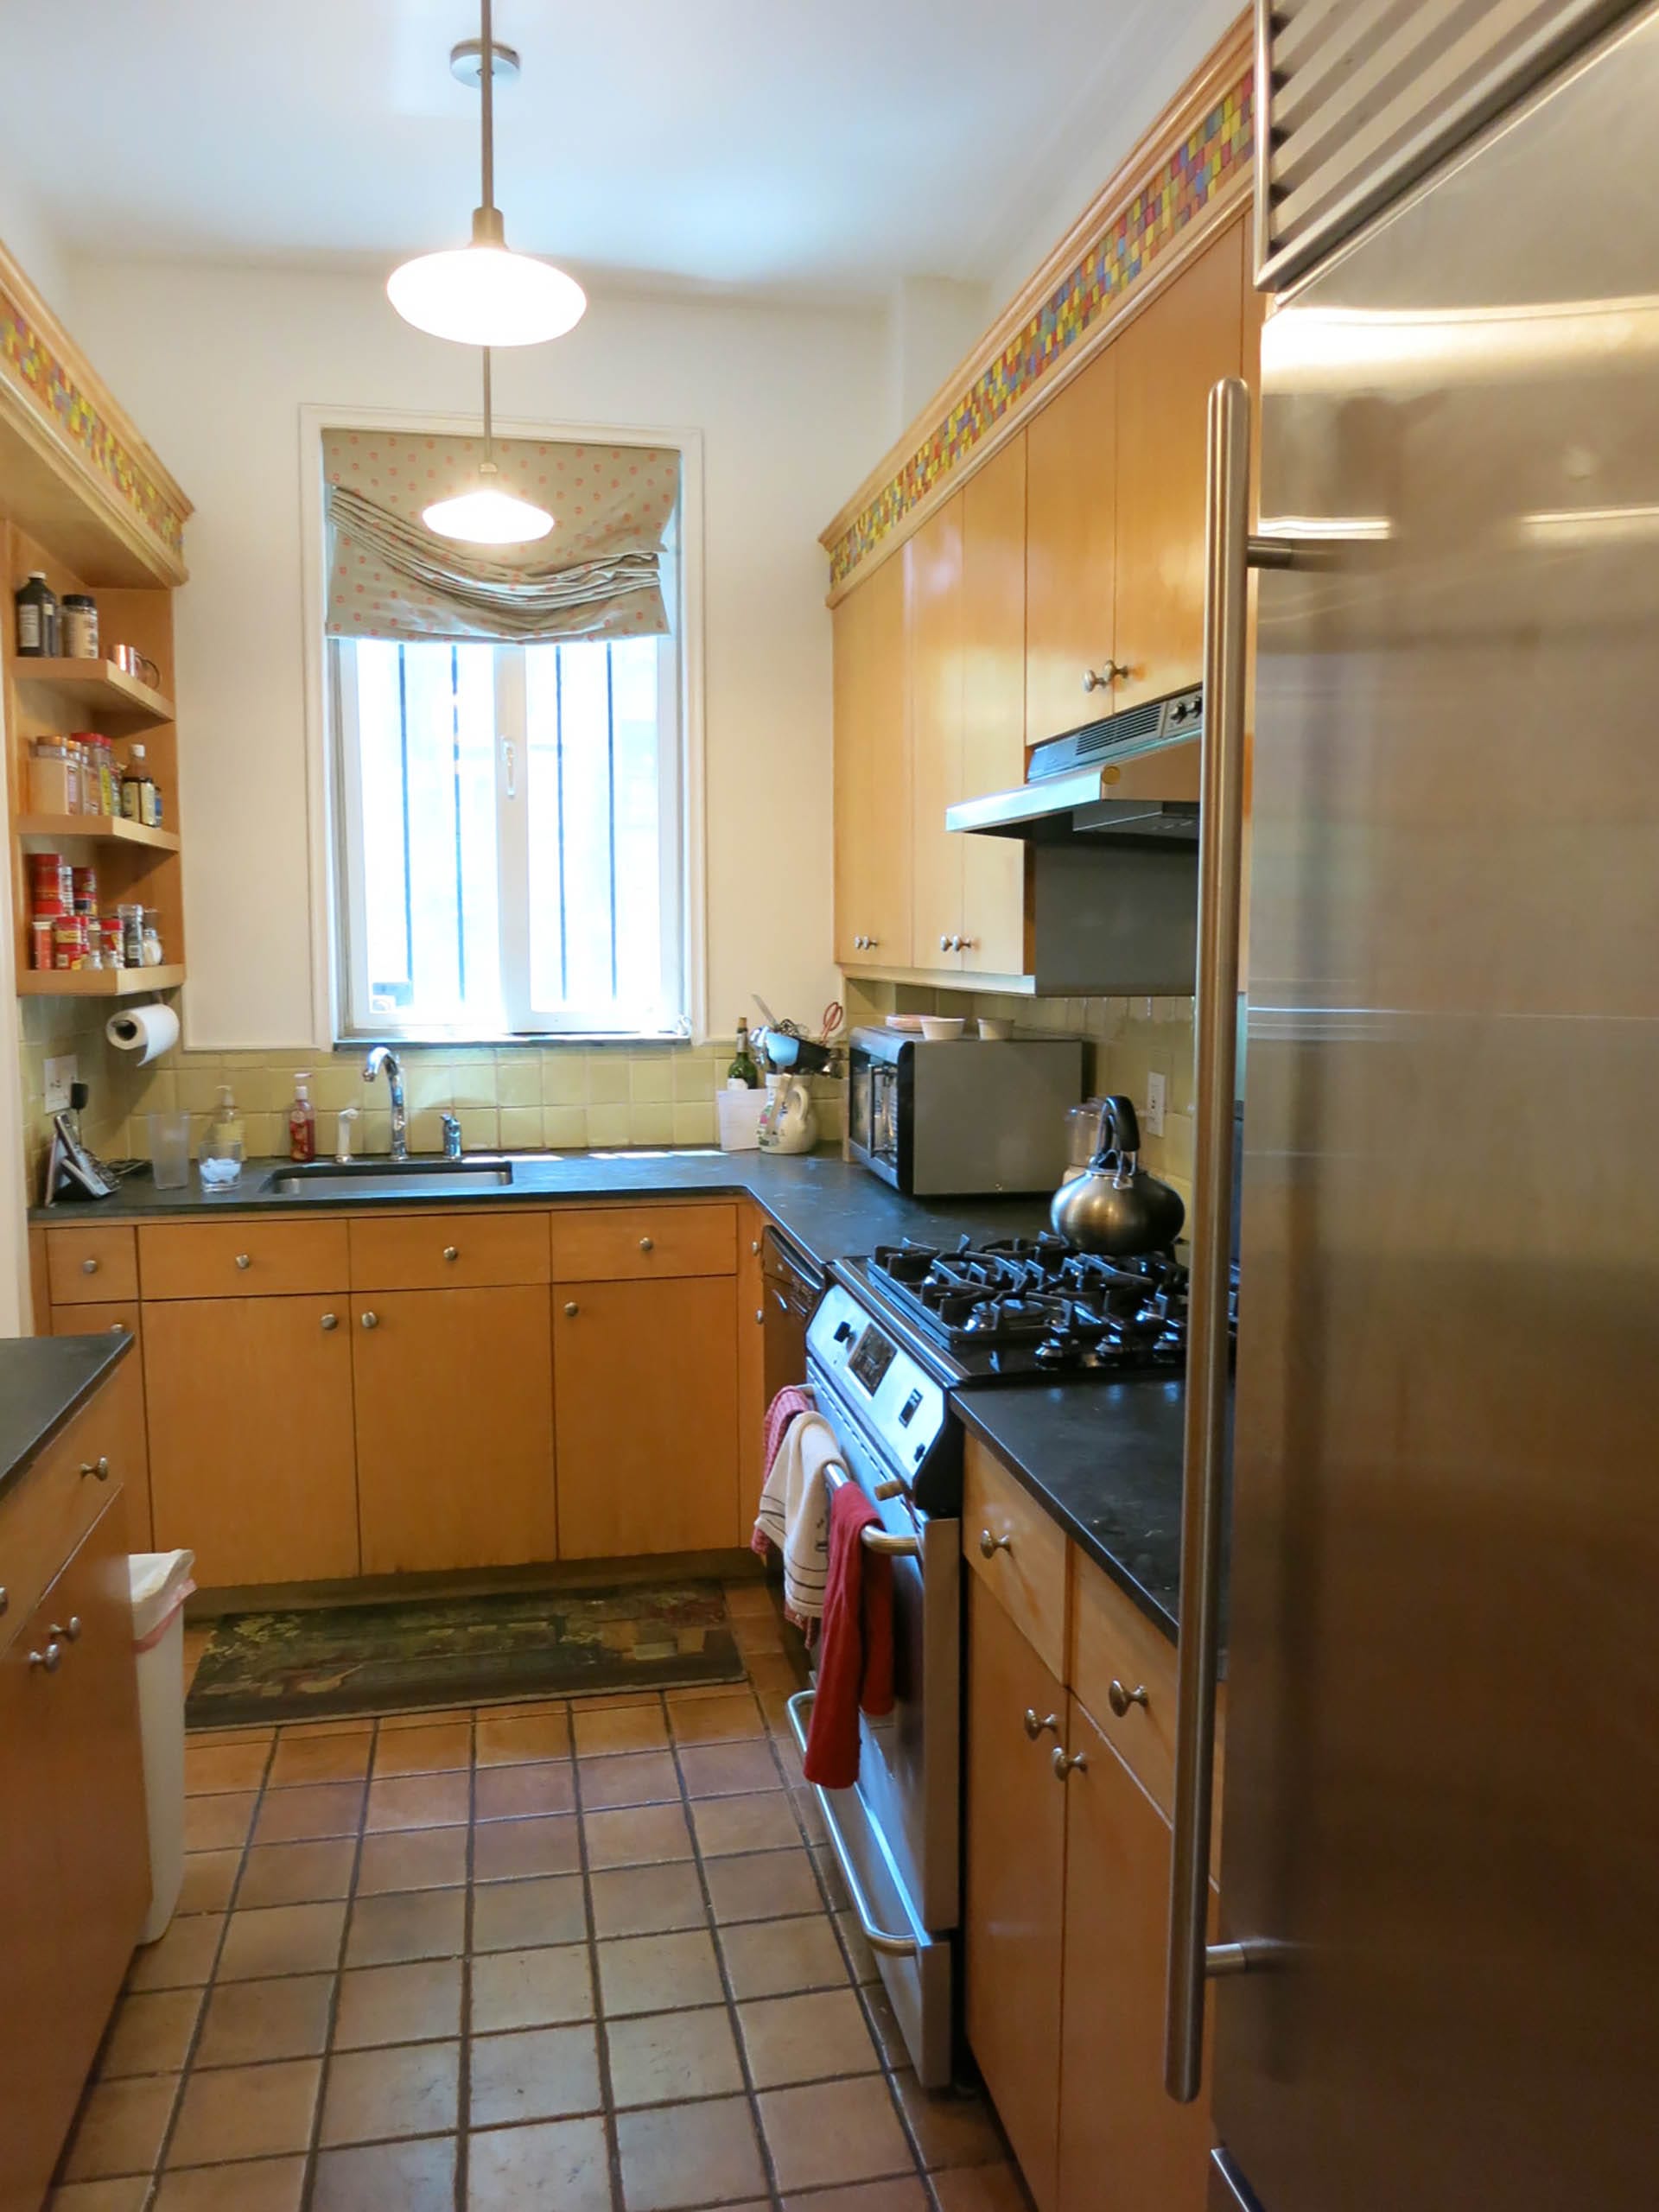 Small kitchen in a Brooklyn Heights townhouse before our renovation